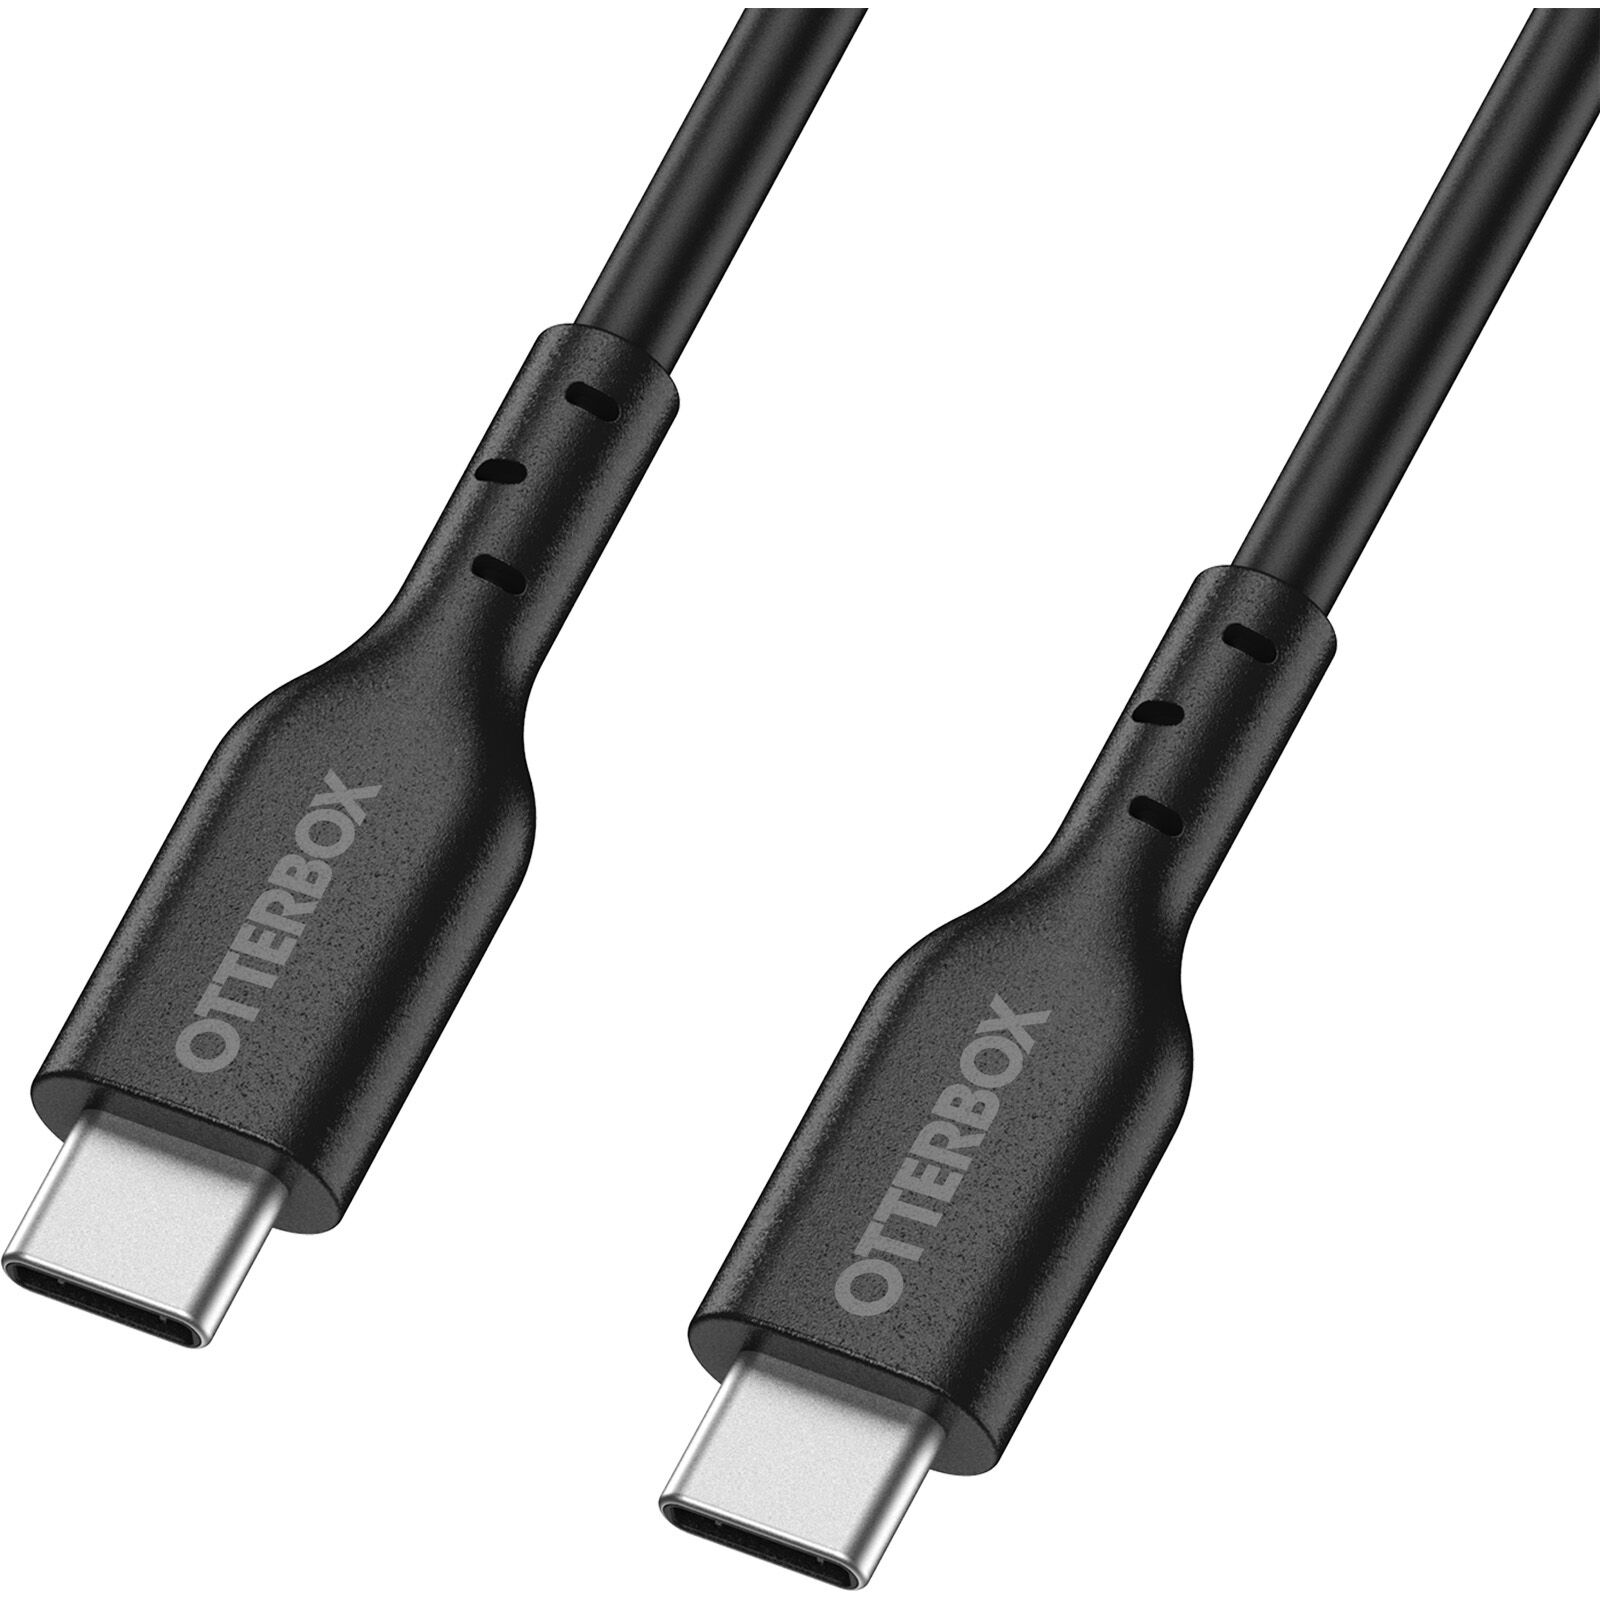 Cable USB-C a USB-C 2 Standard Fast Charge metros negro